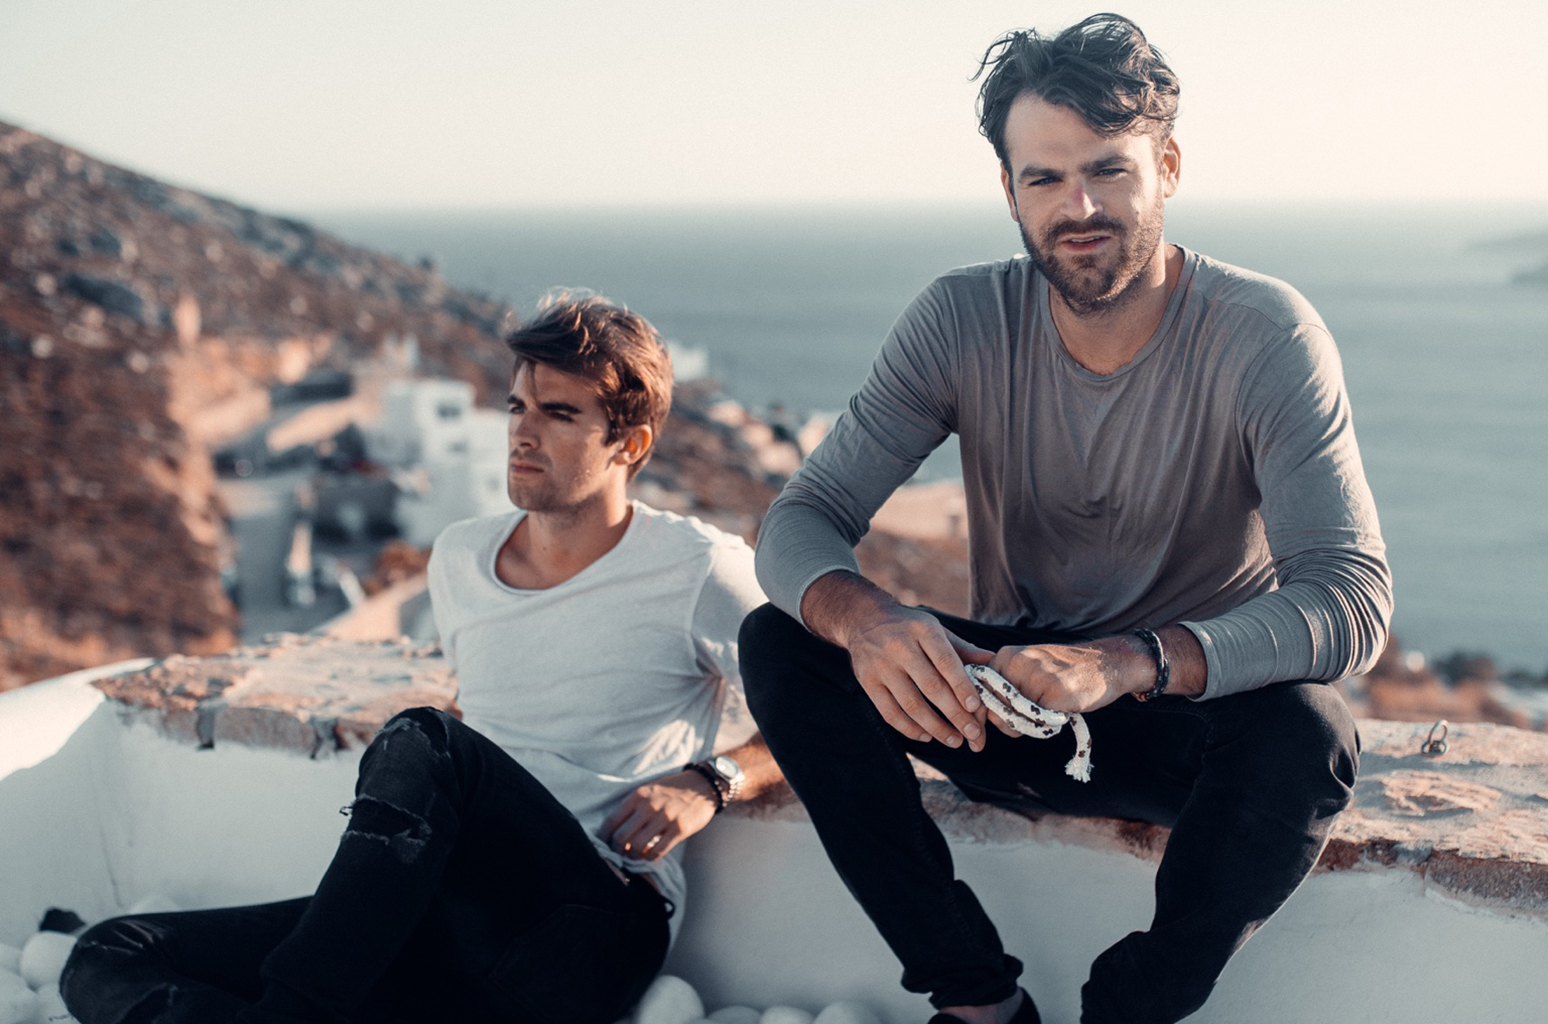 Tele2 arena, Live Nation, The Chainsmokers